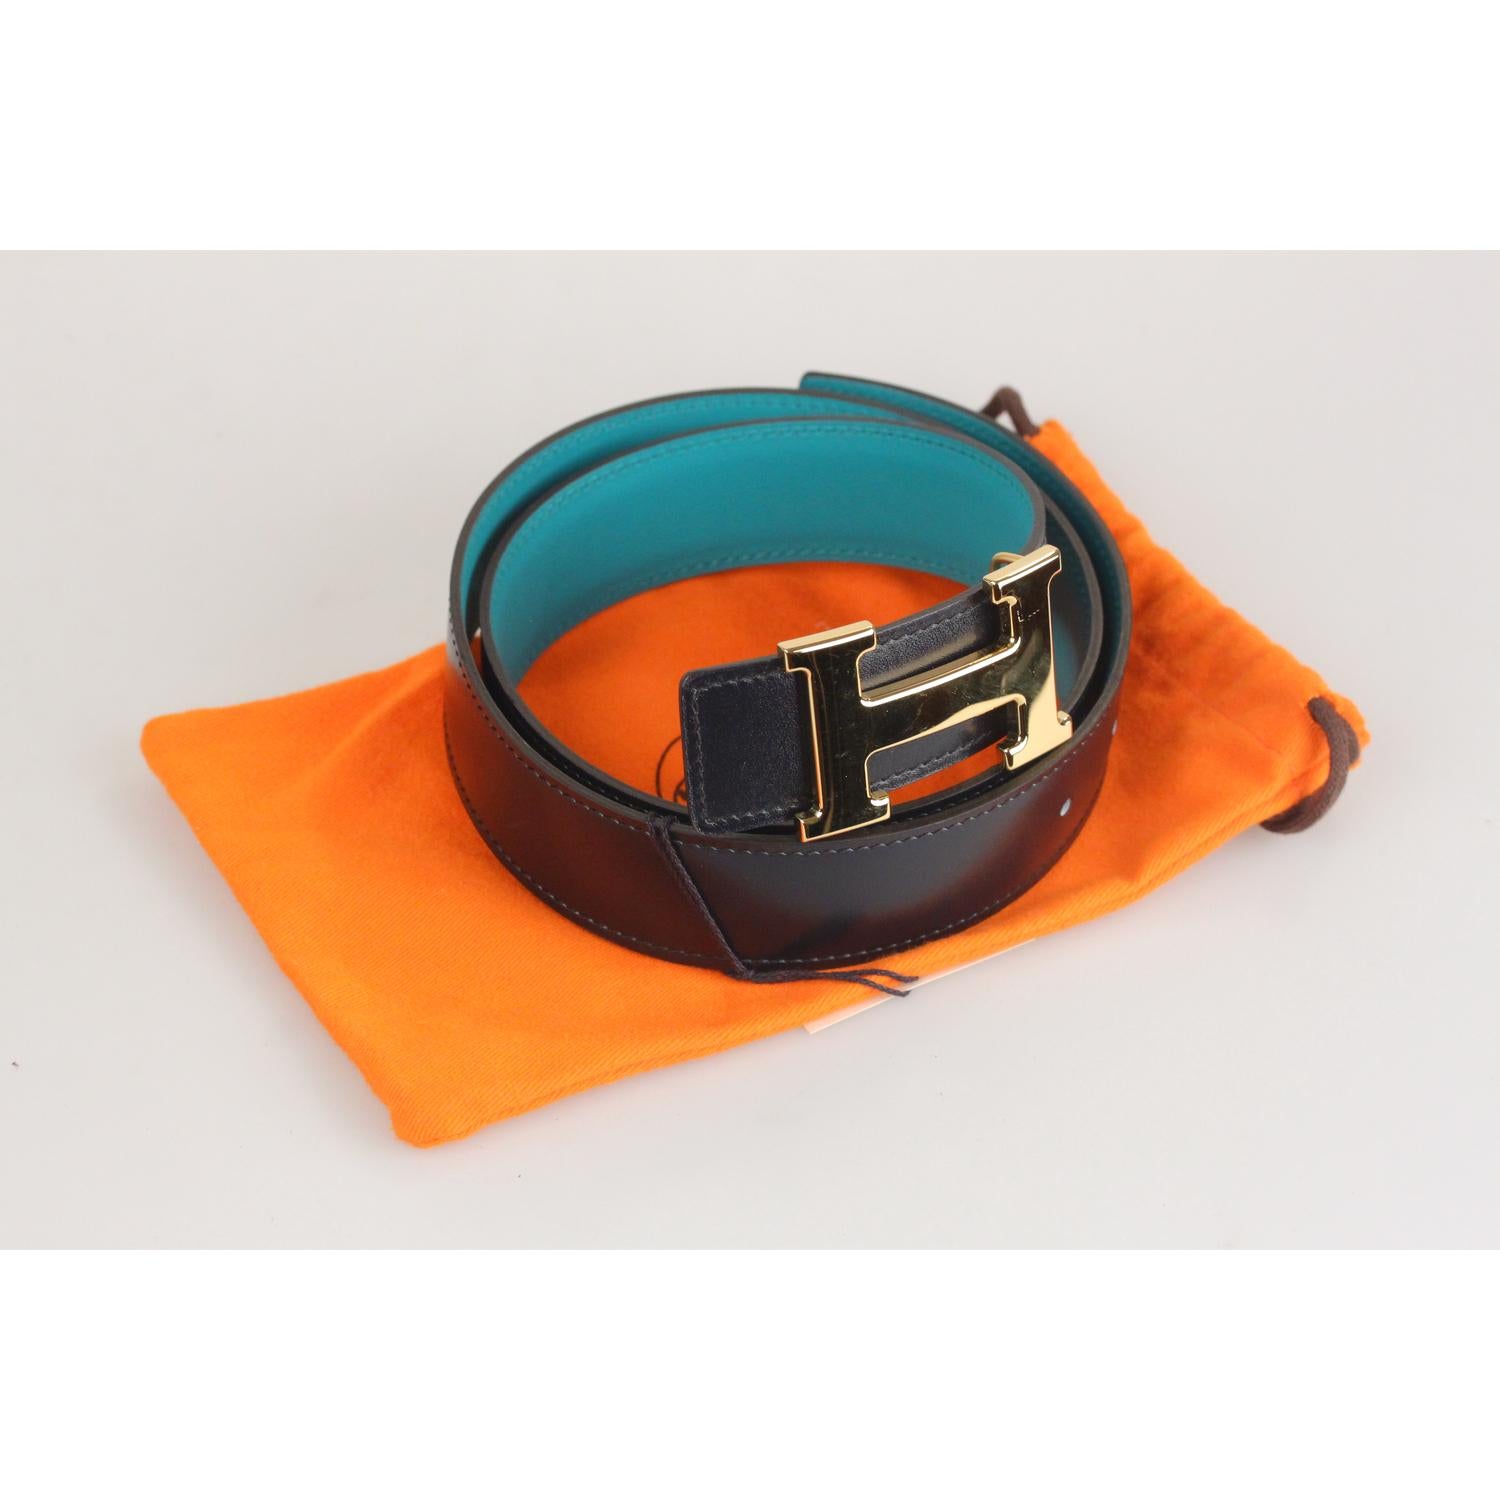 - Hermes Reversible Belt
- Blue leather on a side and teal leather on the other side
- Gold metal H Buckle
- 3 holes adjustment
- Size: 80 
- Logo & Tags: 'HERMES Paris - Made in France' engraved on the tan side, 'T' blind stamp without shape (Year